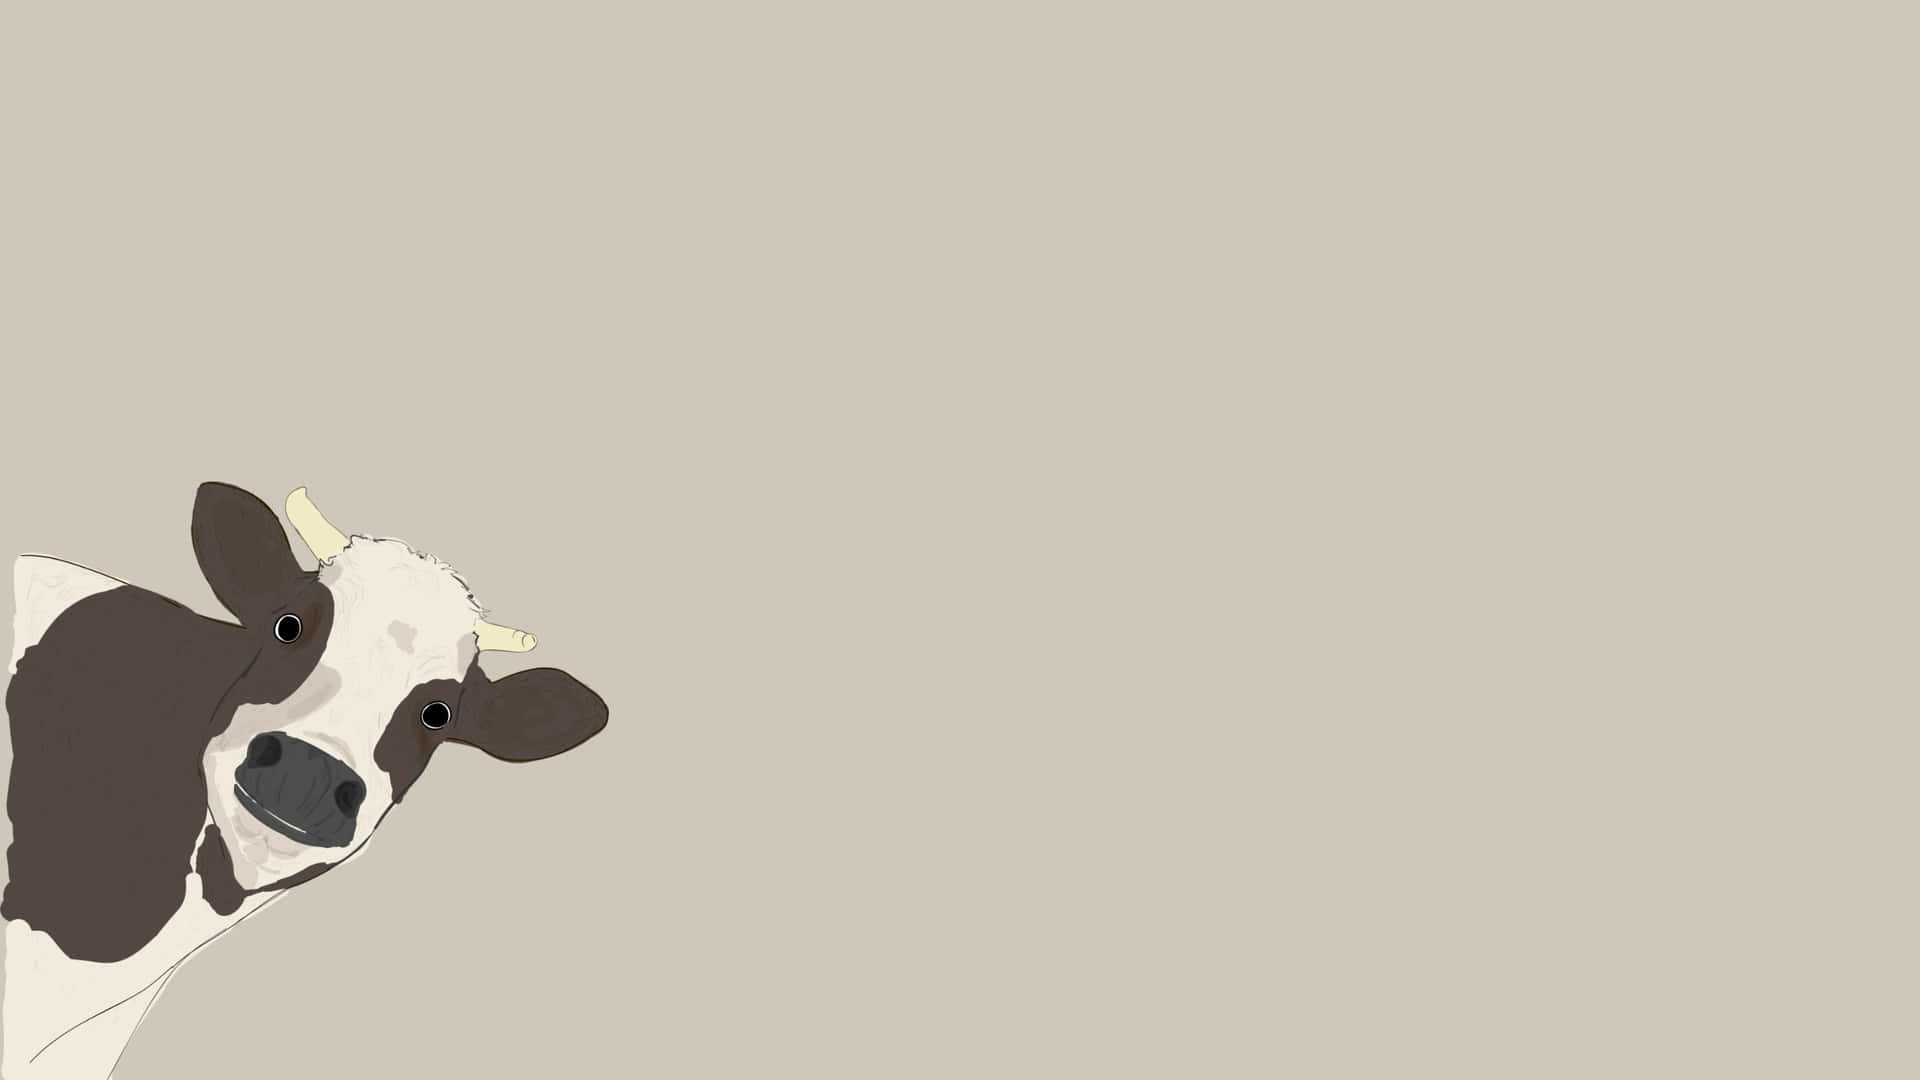 Download A lyrical portrait of the majesty and beauty of a grass-eating cow.  Wallpaper